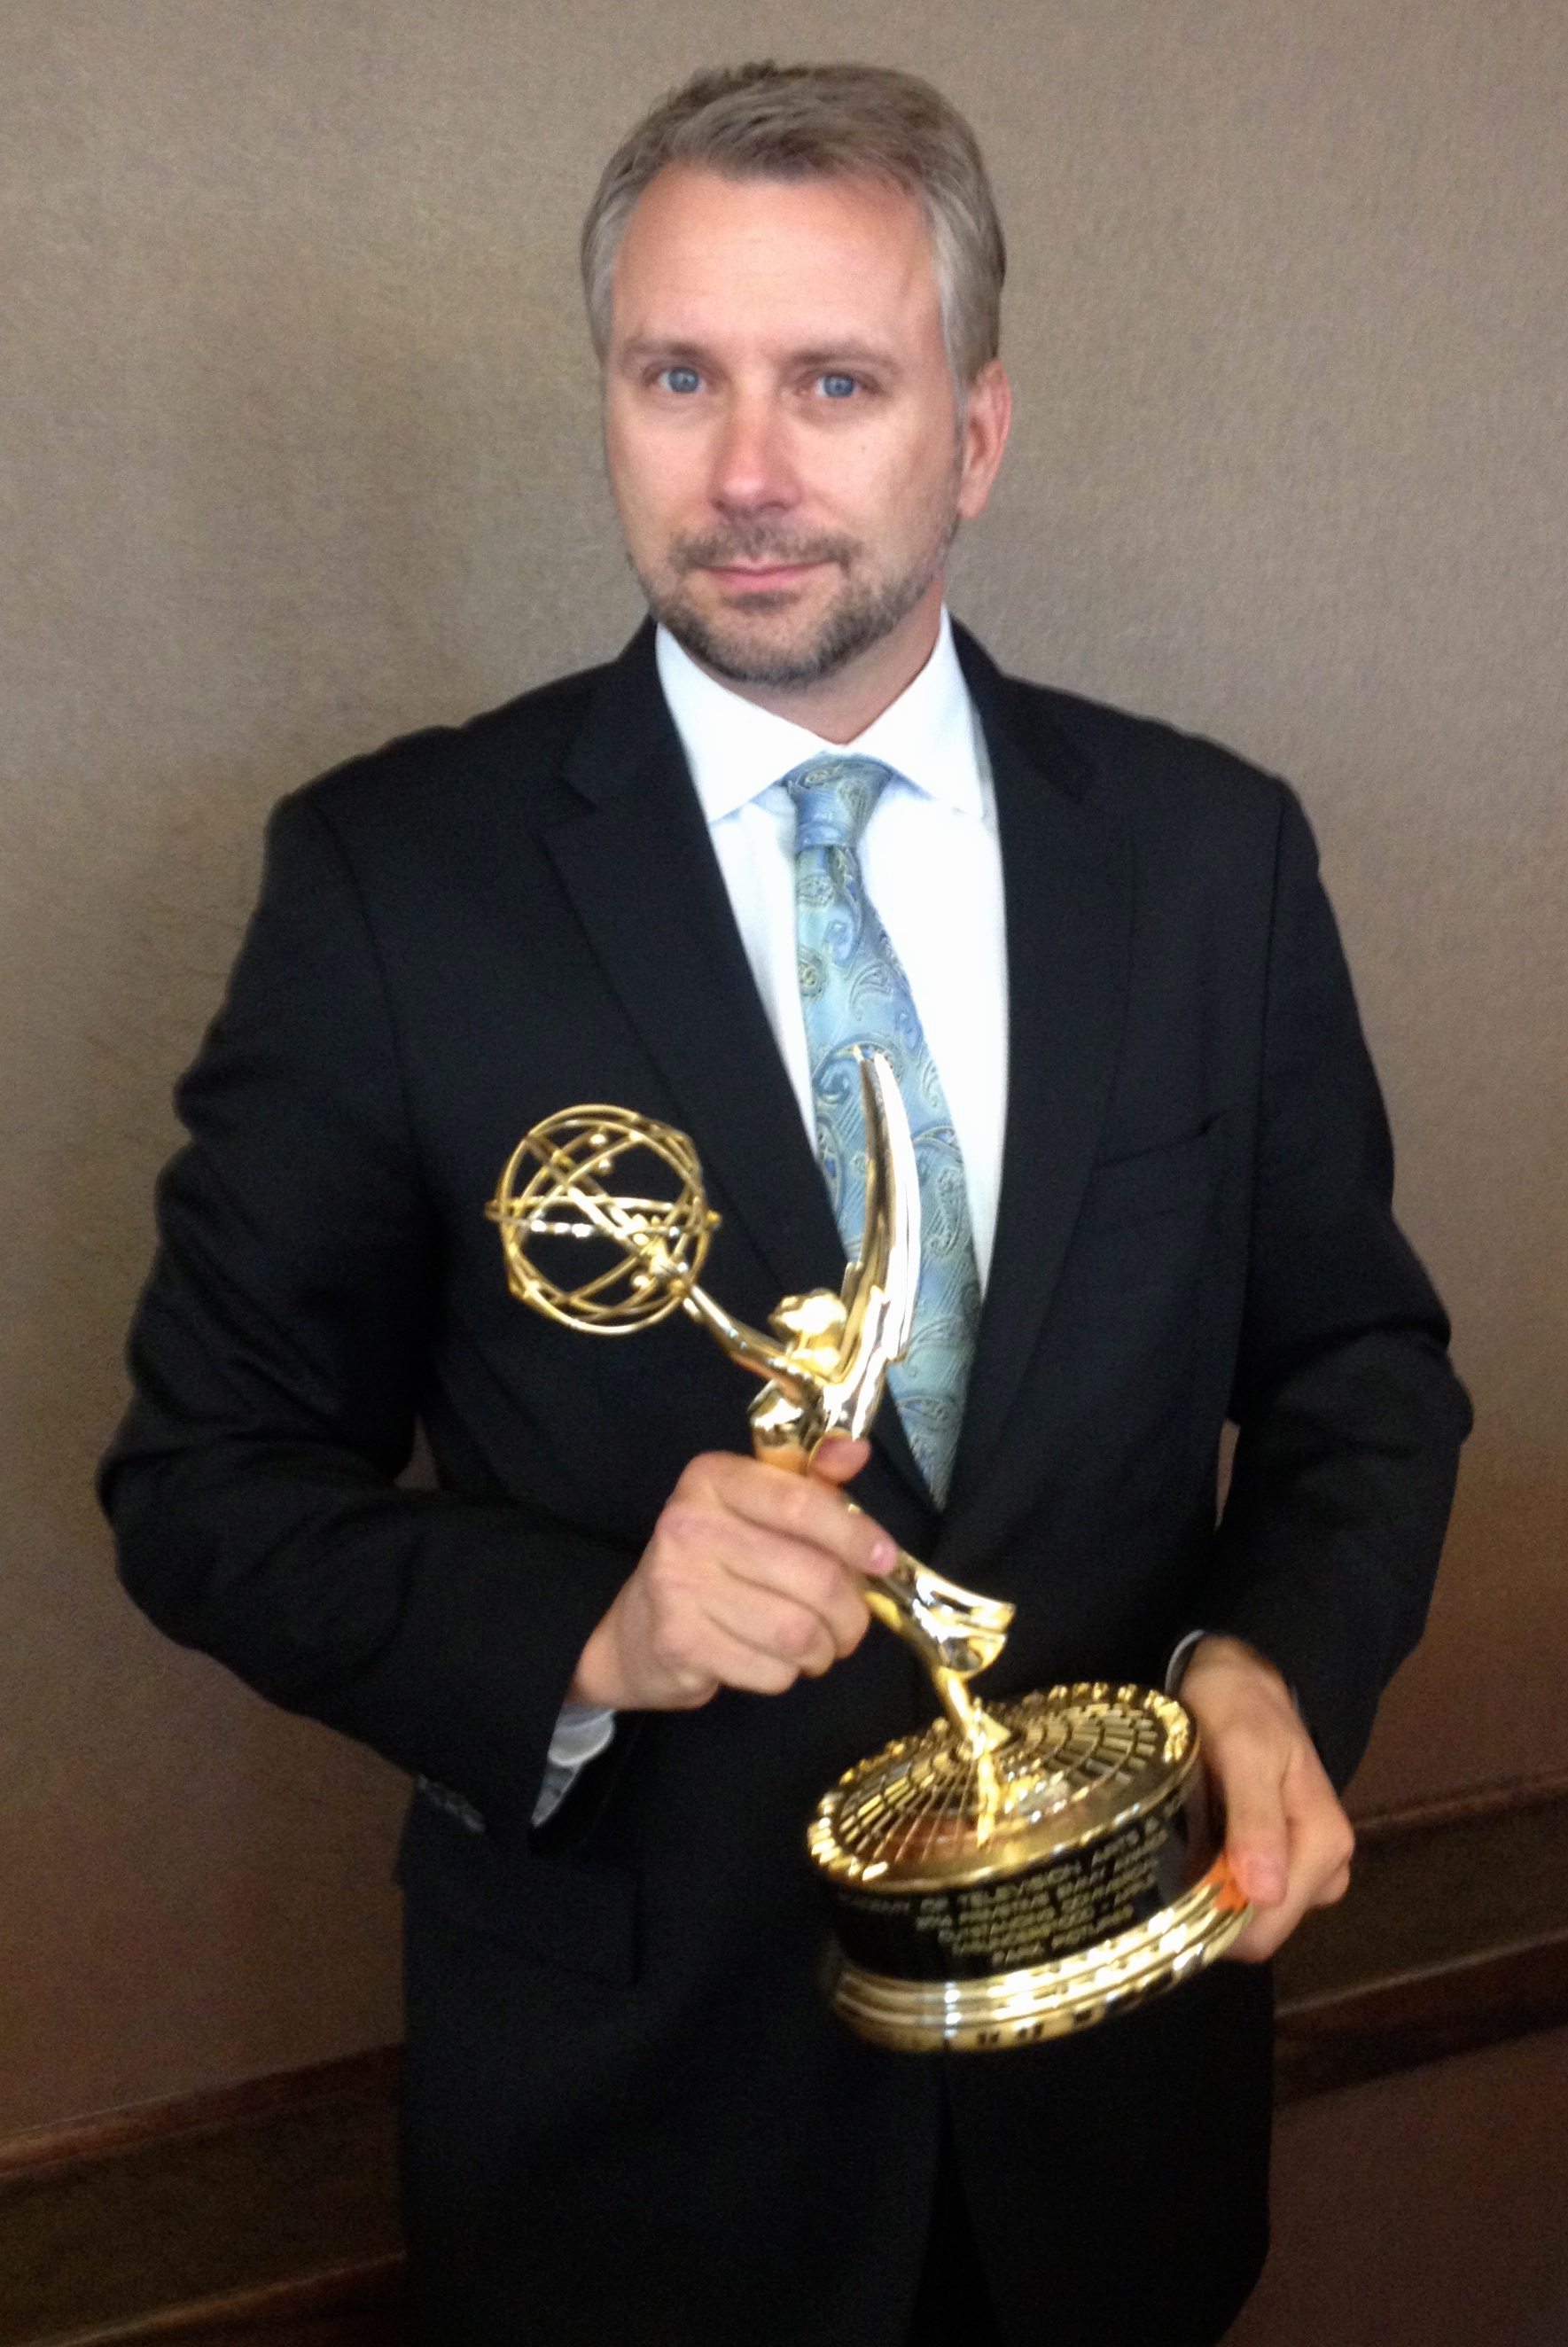 My client Chris Ippolito nabs Emmy award for a feel-good Apple ad Misunderstood, starring his extended family of 23